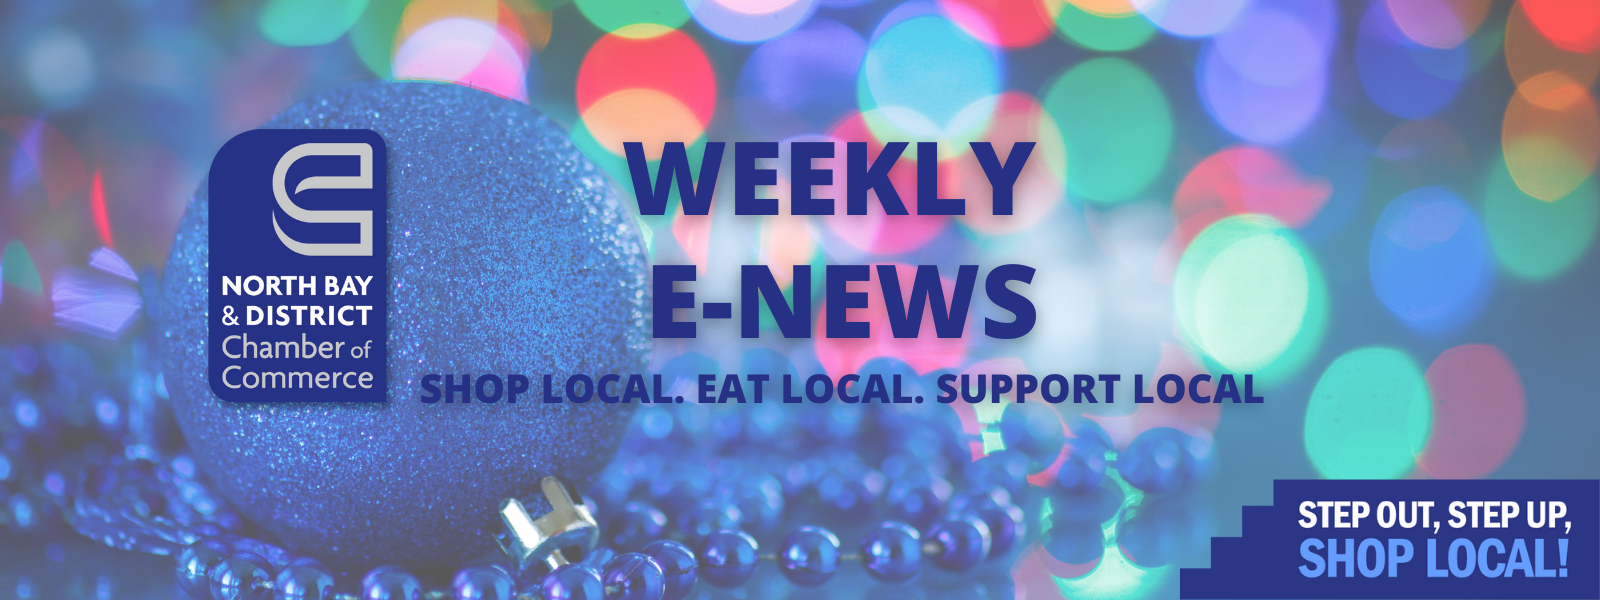 Weekly E-News - North Bay and District Chamber of Commerce Christmas